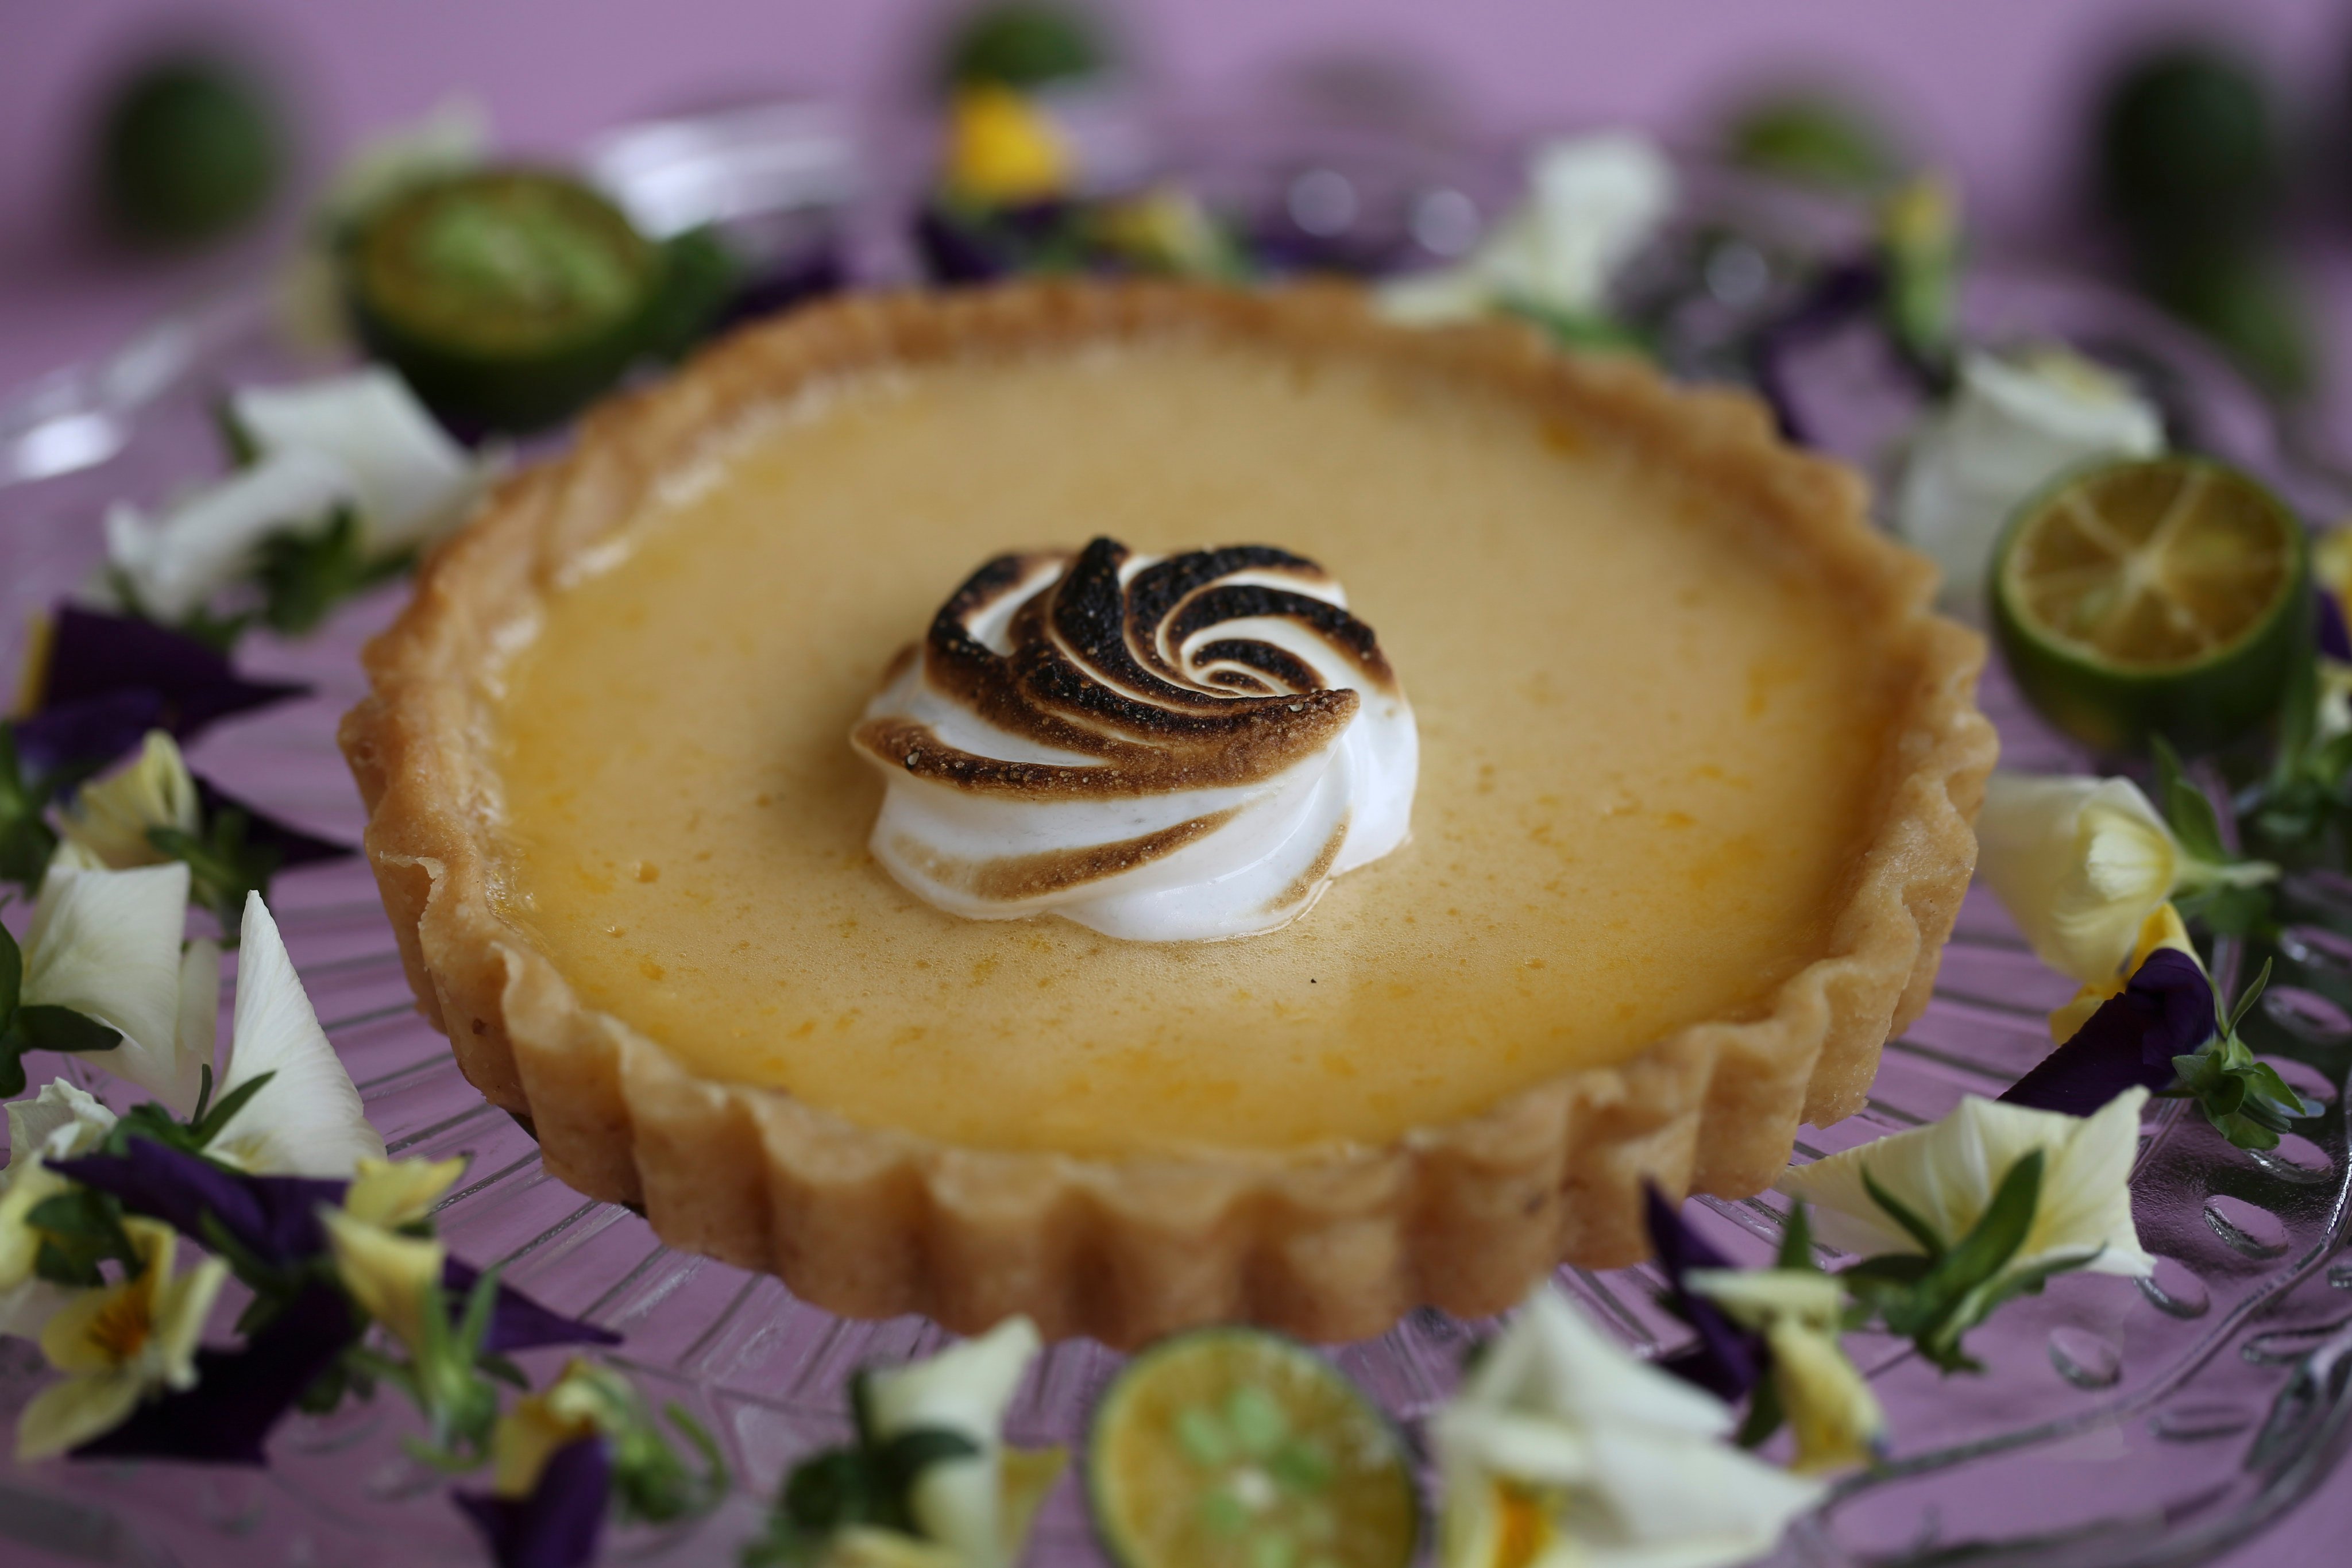 How to make a refreshing calamansi and crème fraîche tart with macadamia crust and meringue. Photo: Jonathan Wong